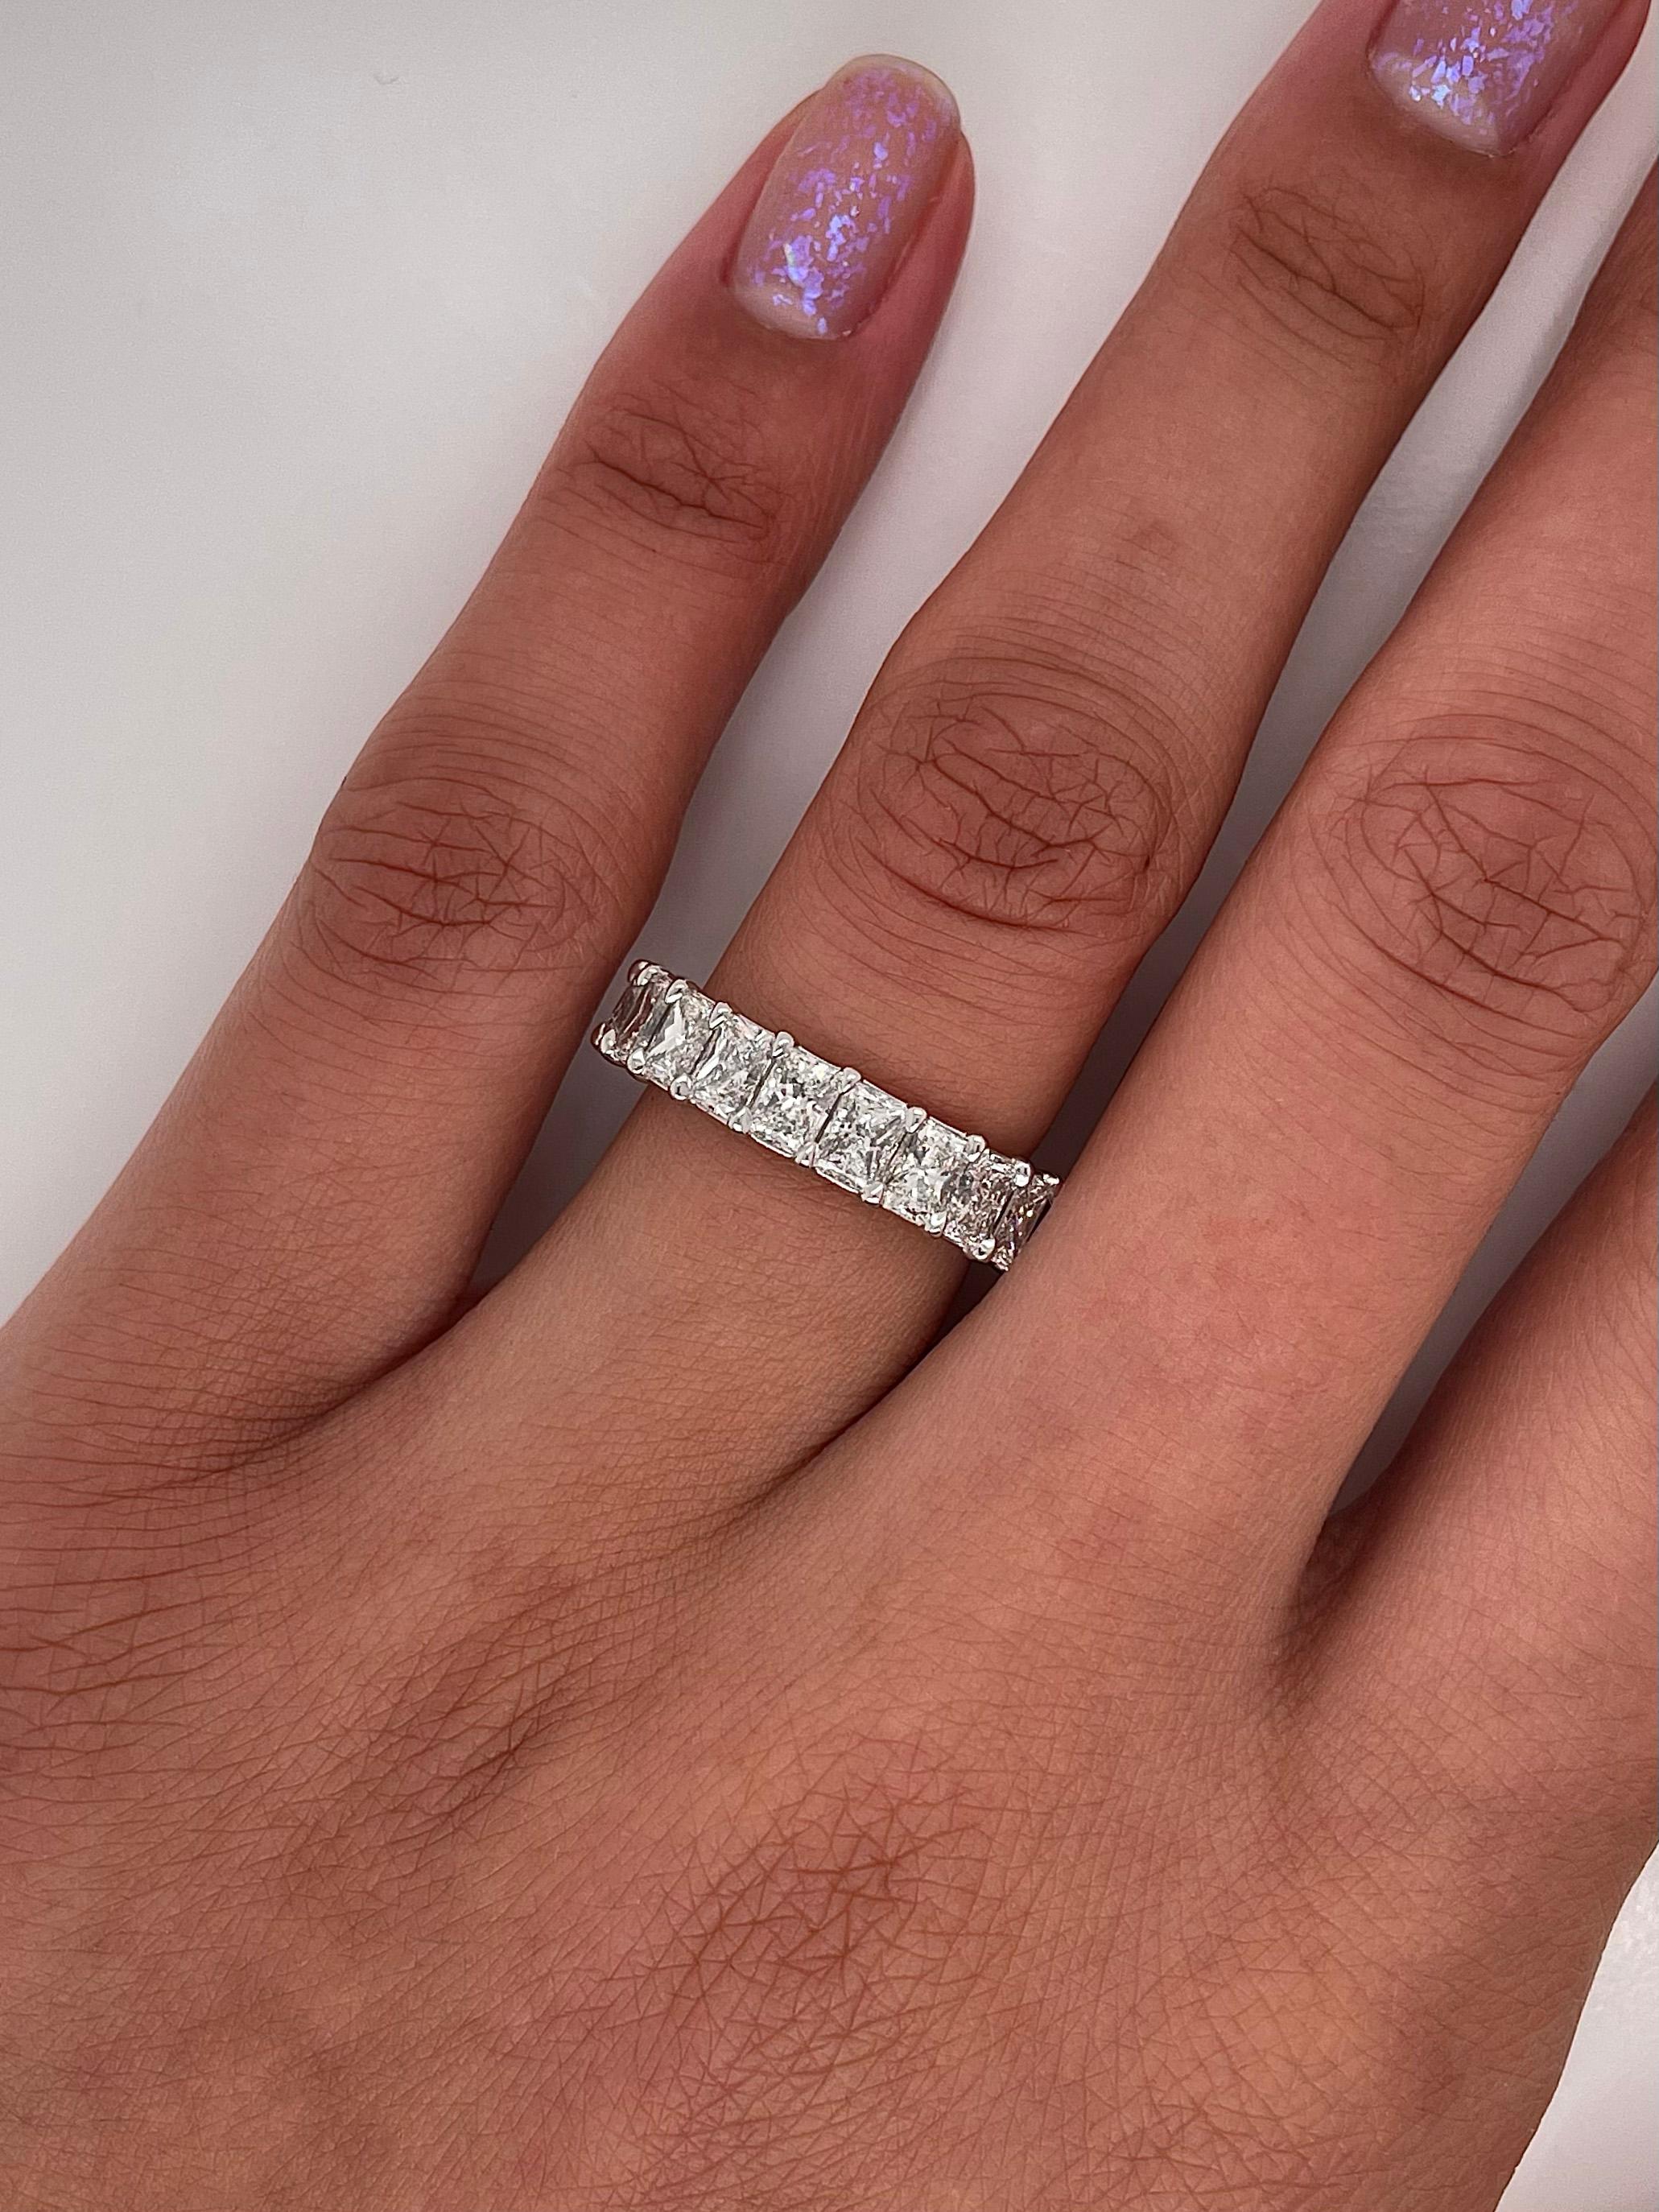 Ladies diamond Eternity band carries 5.13ct of radiant diamonds placed in platinum.

Size: 6.0
Color: G
Clarity: VS1

This shared prong style Eternity band was handmade by our jewelers in New York City 